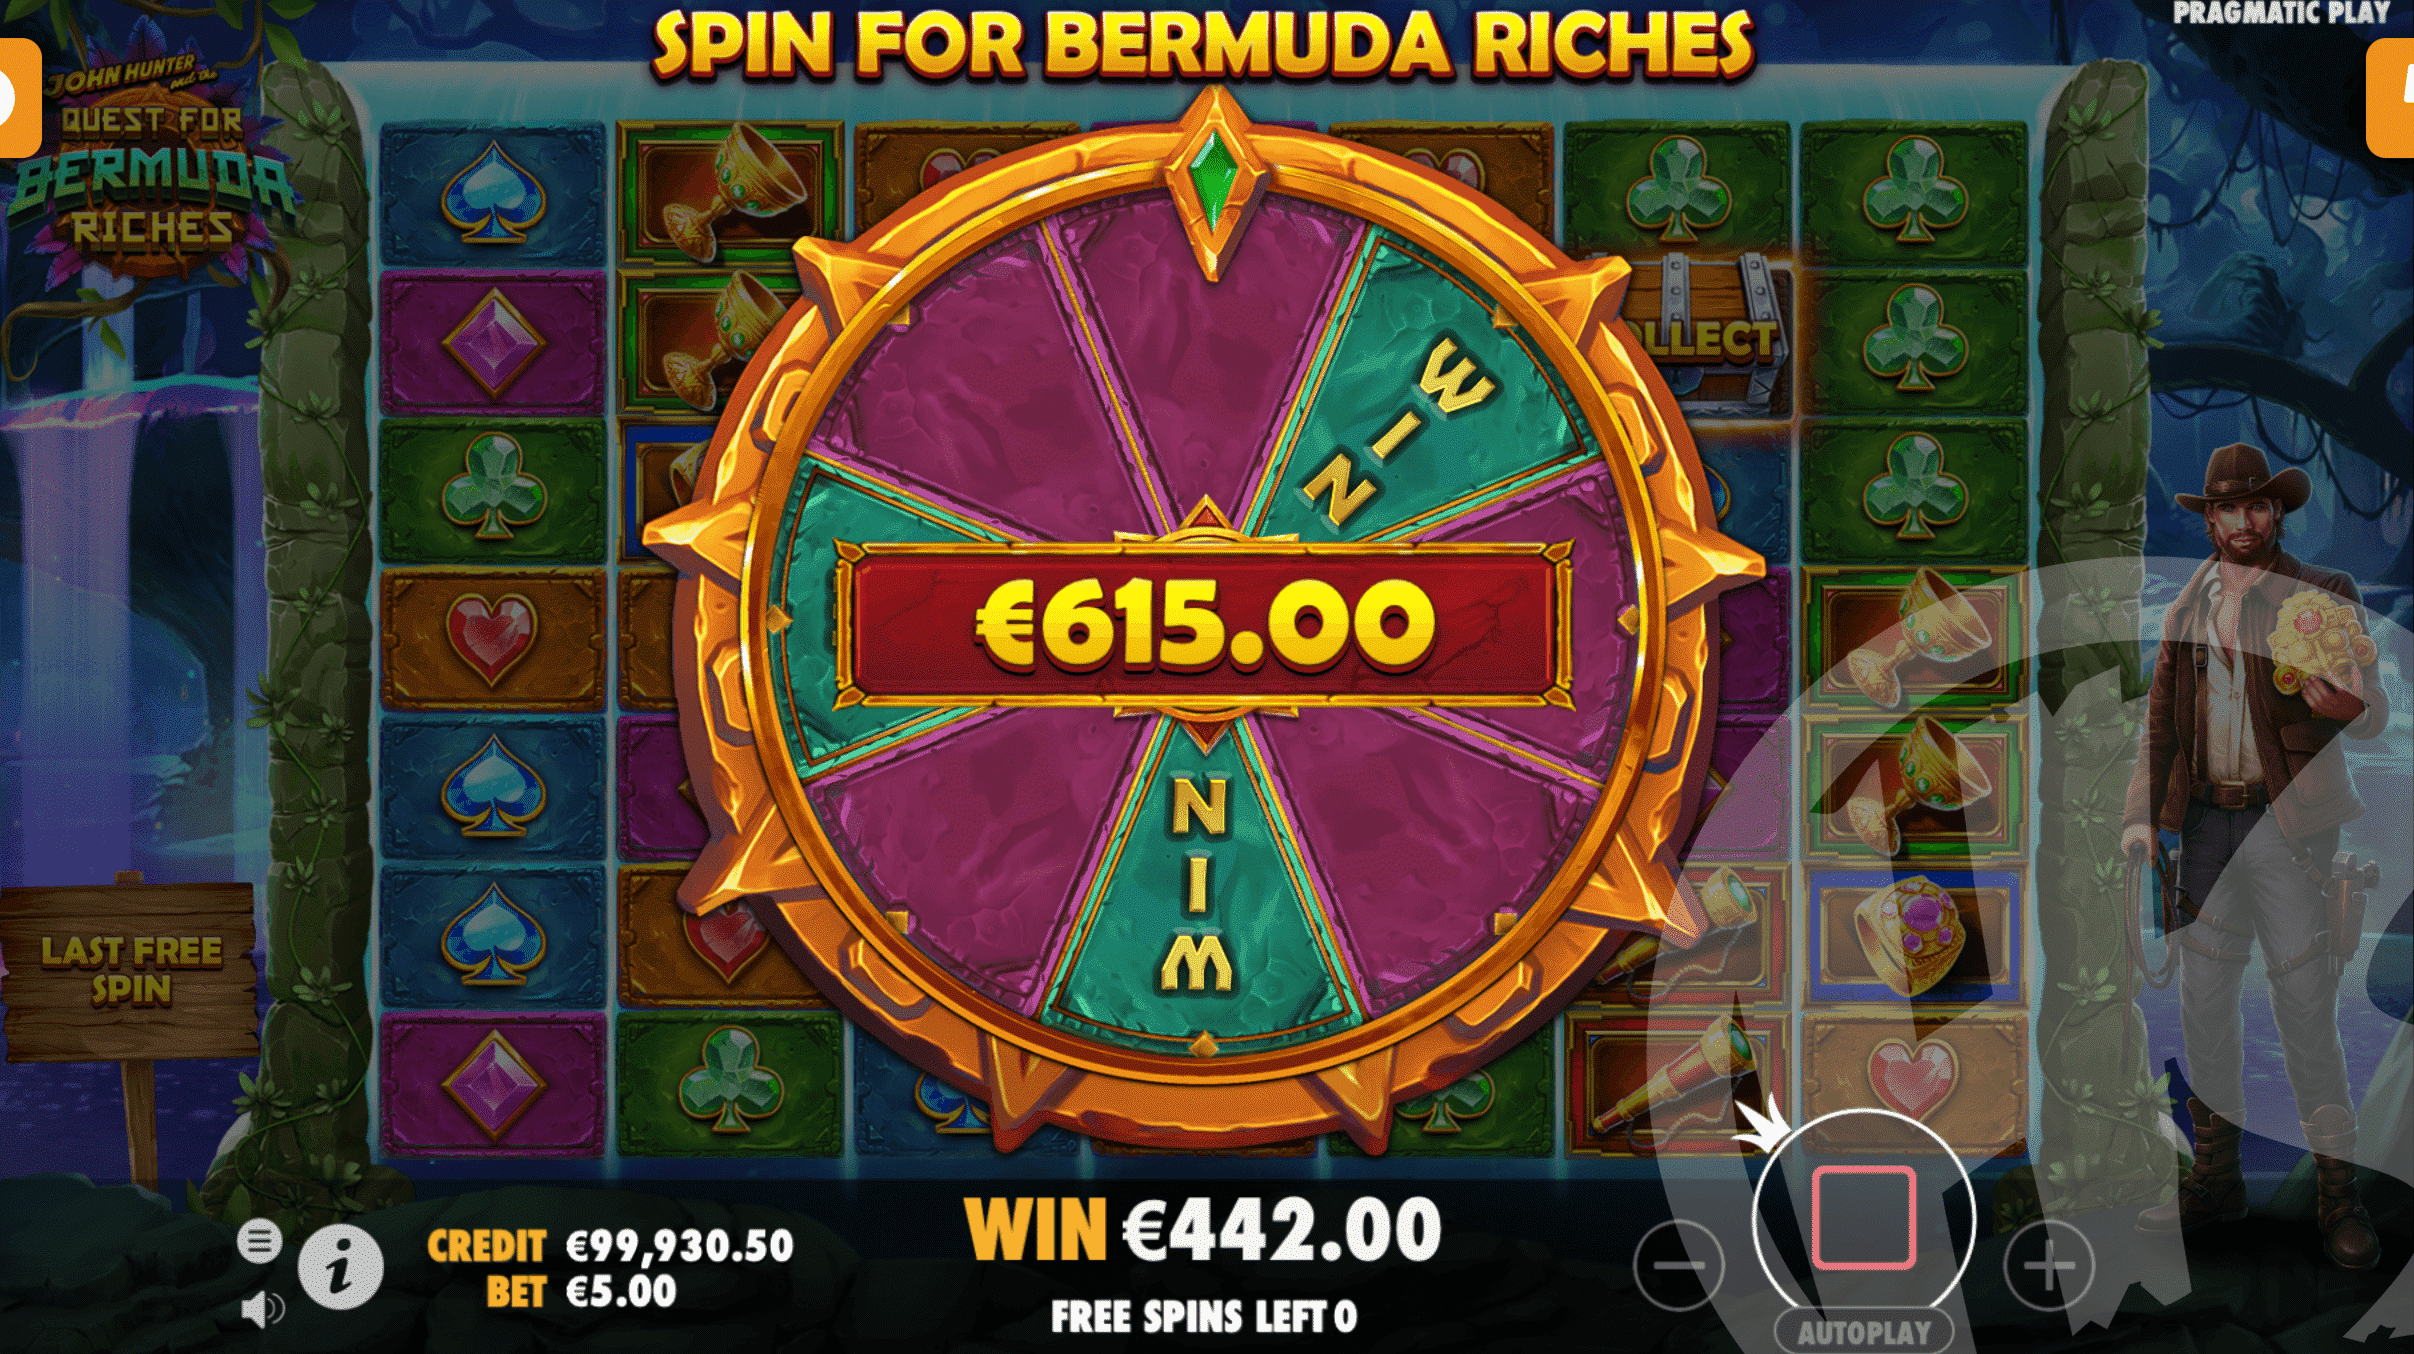 Players Have the Chance to Collect Any Accumulated Cash Values at the End of Free Spins